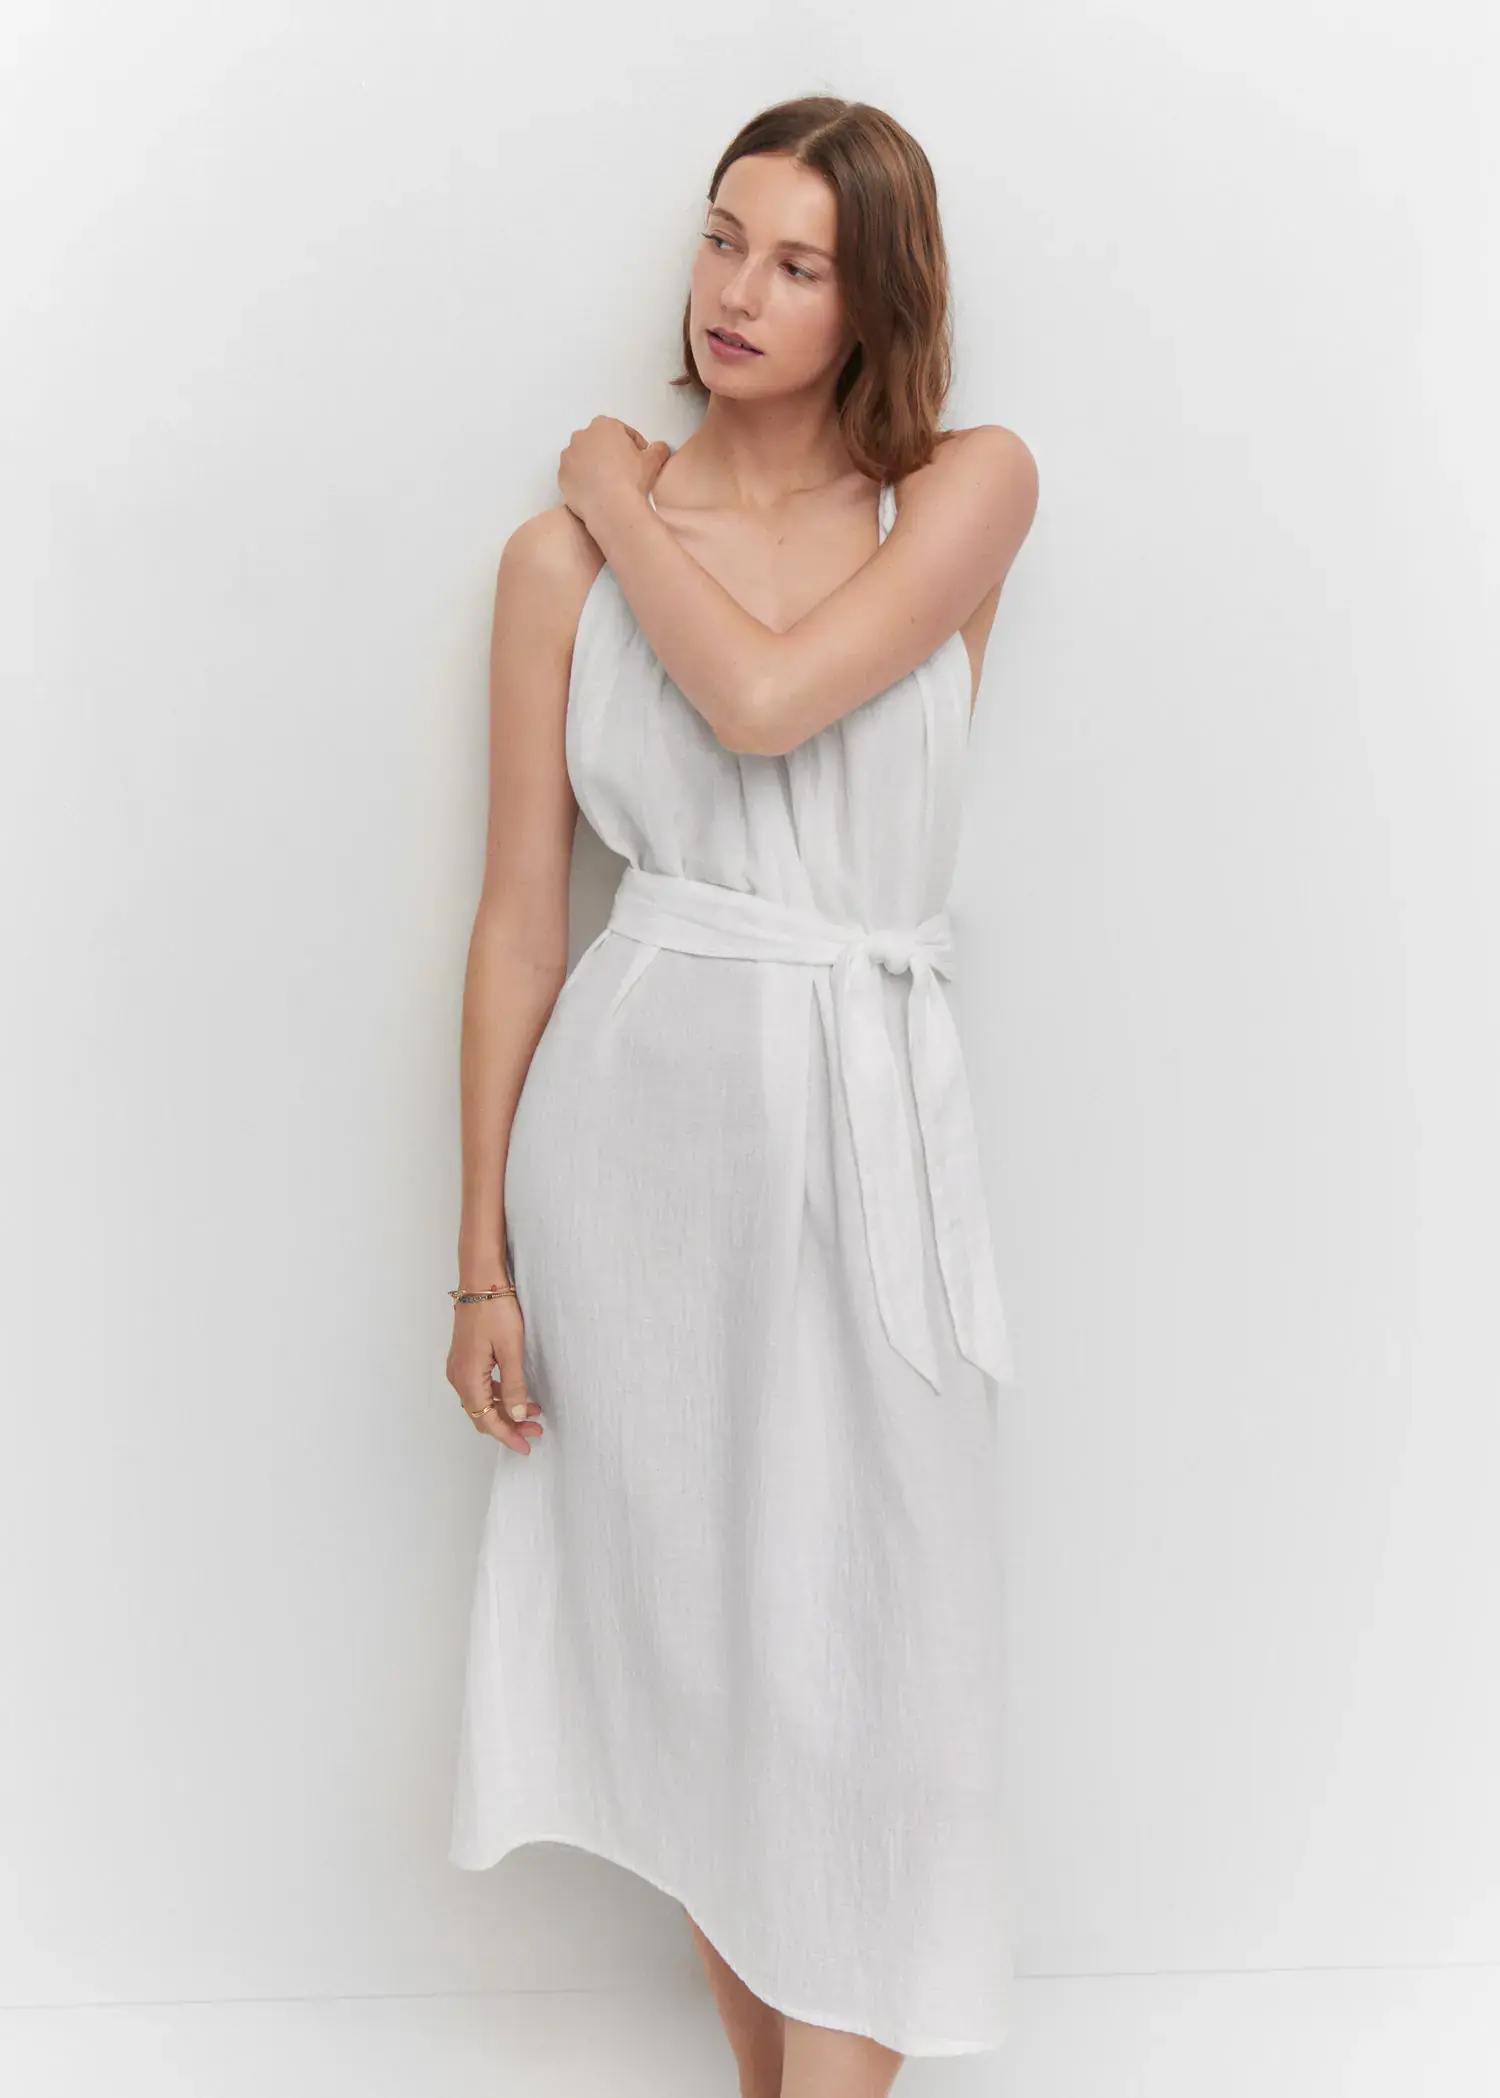 Mango Strap dress with belt. a woman in a white dress leaning against a wall. 